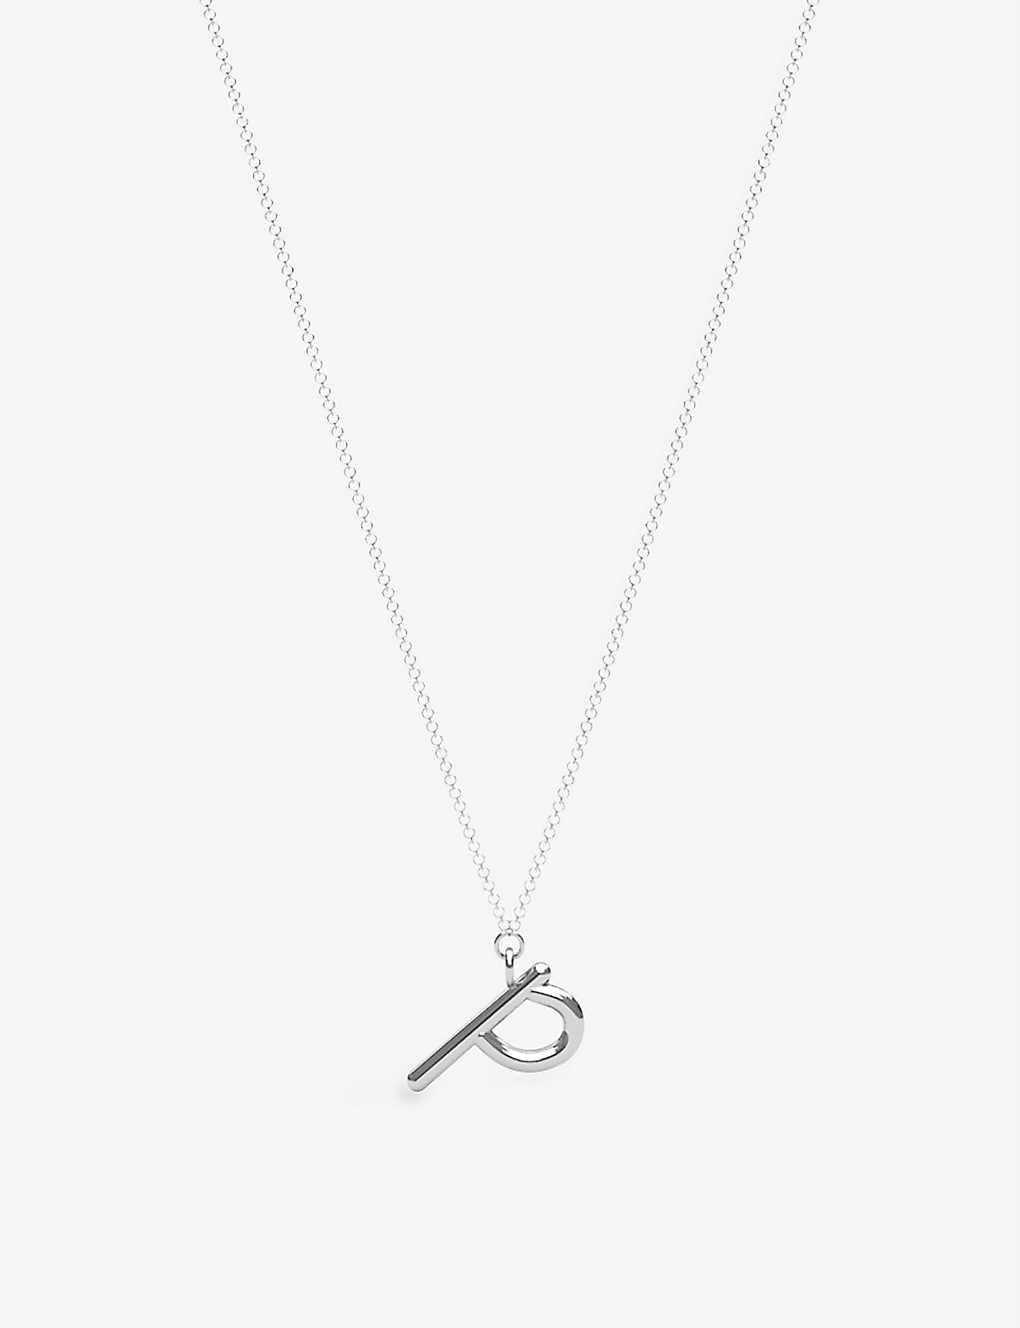 The Alkemistry Womens 18ct White Gold Love Letter P Initial 18ct White-gold Pendant Necklace